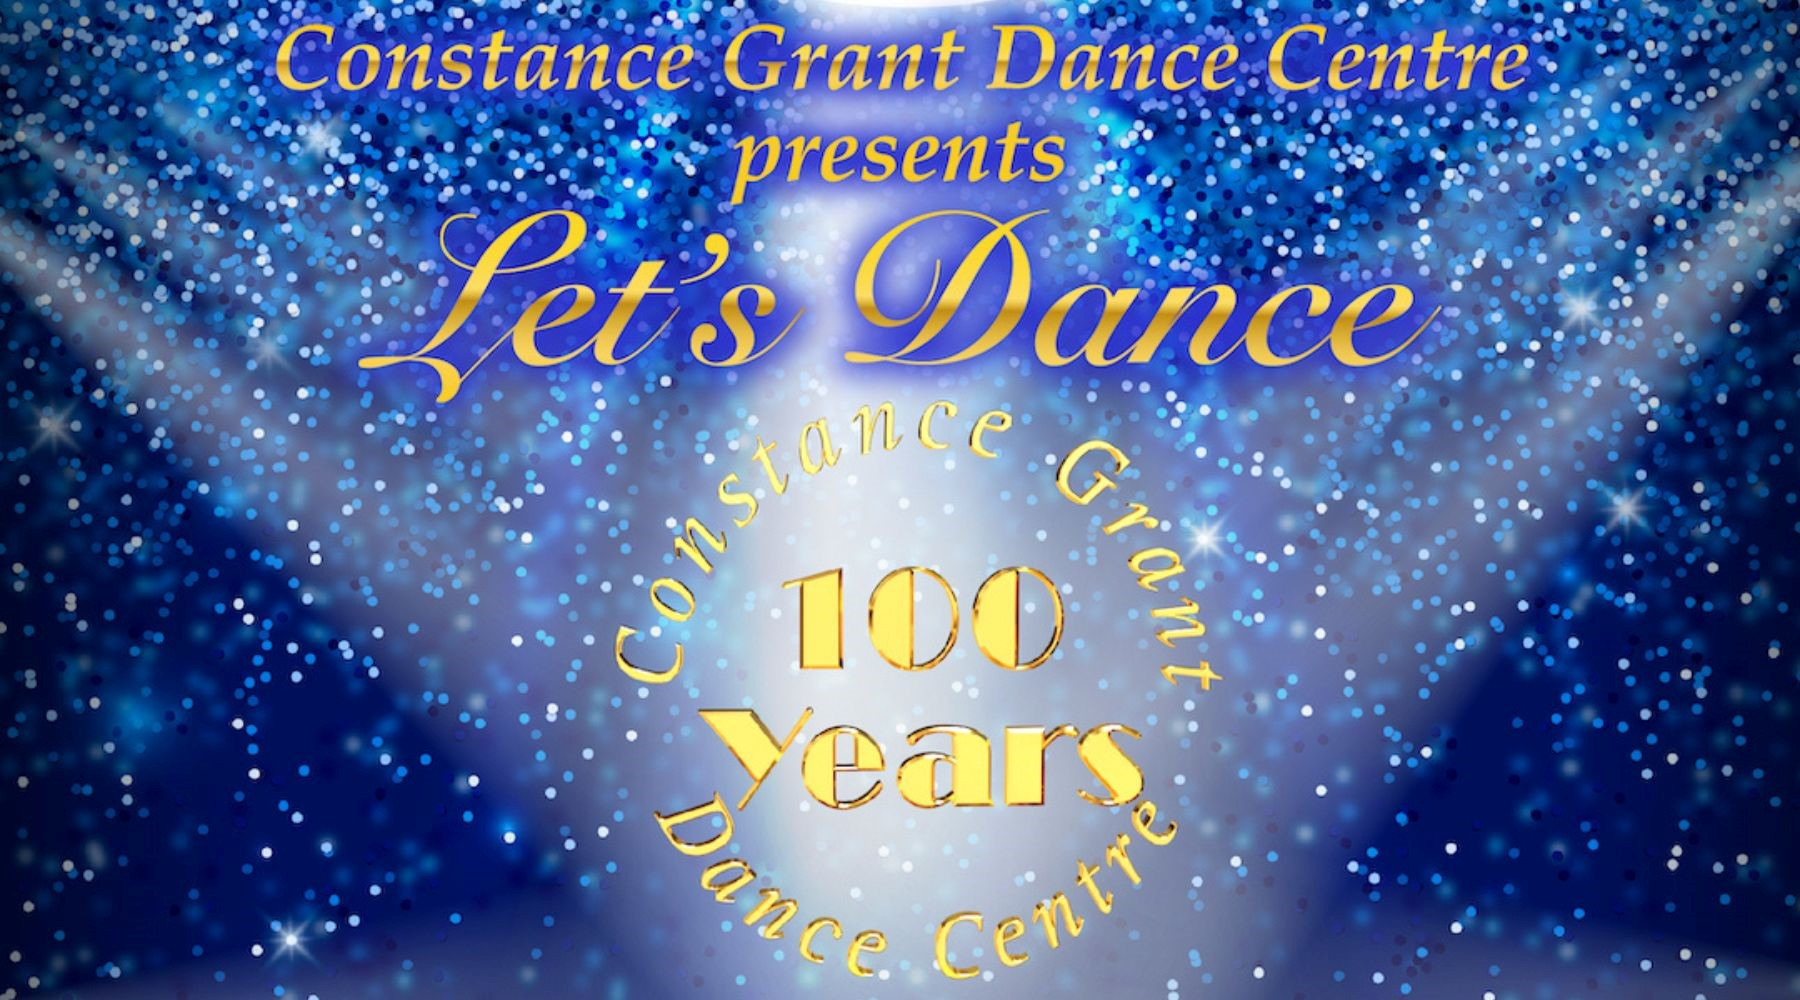 Image name Lets Dance 100 Years of CGDC at Sheffield City Hall Oval Hall Sheffield 1 the 28 image from the post Events in Yorkshire.com.